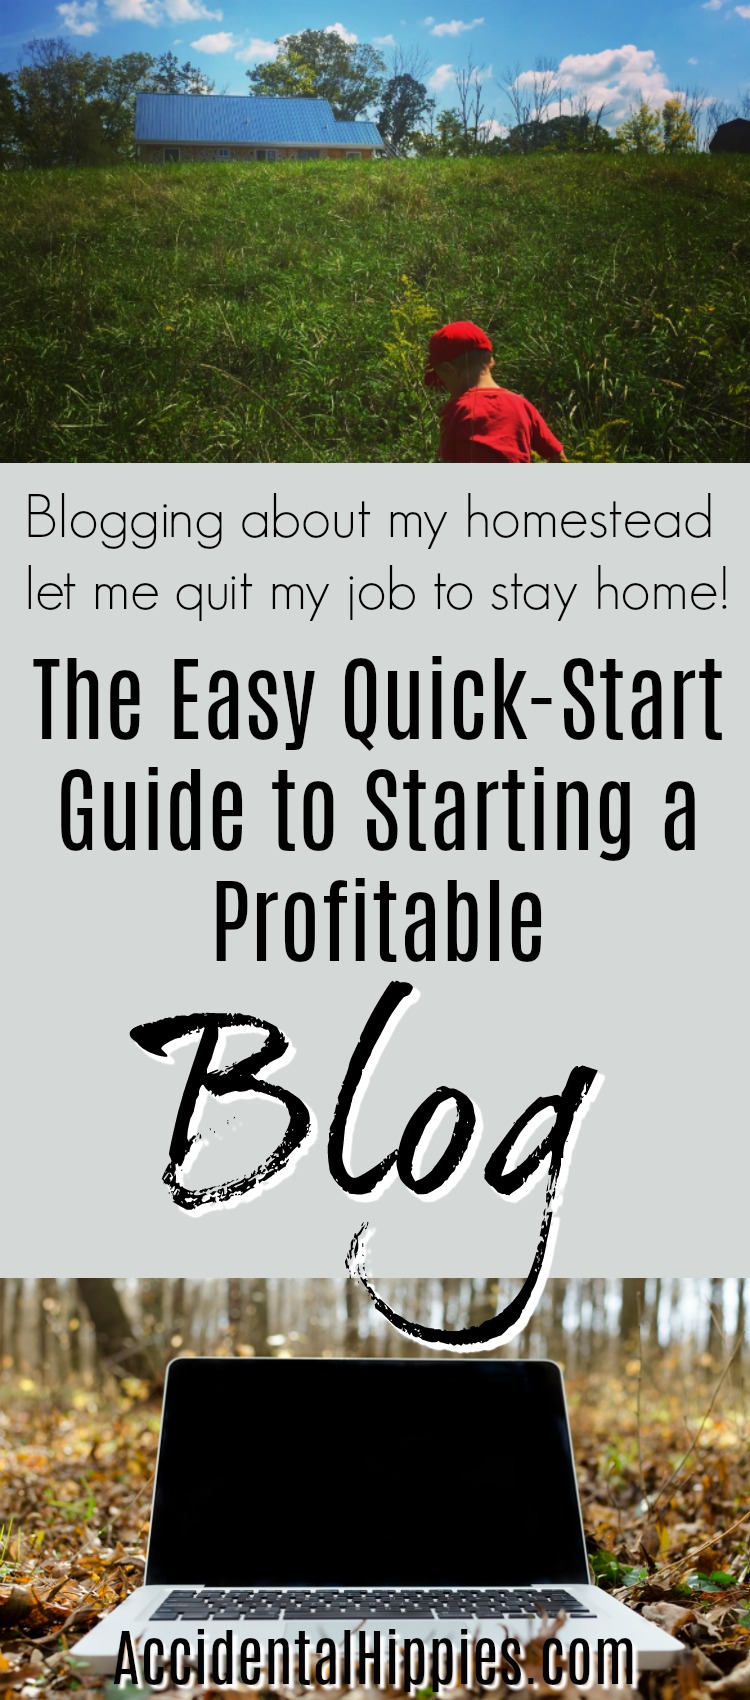 Want to create an engaging and profitable blog but don't know how to start? This easy, beginner's quick-start guide will get you going. #blogging